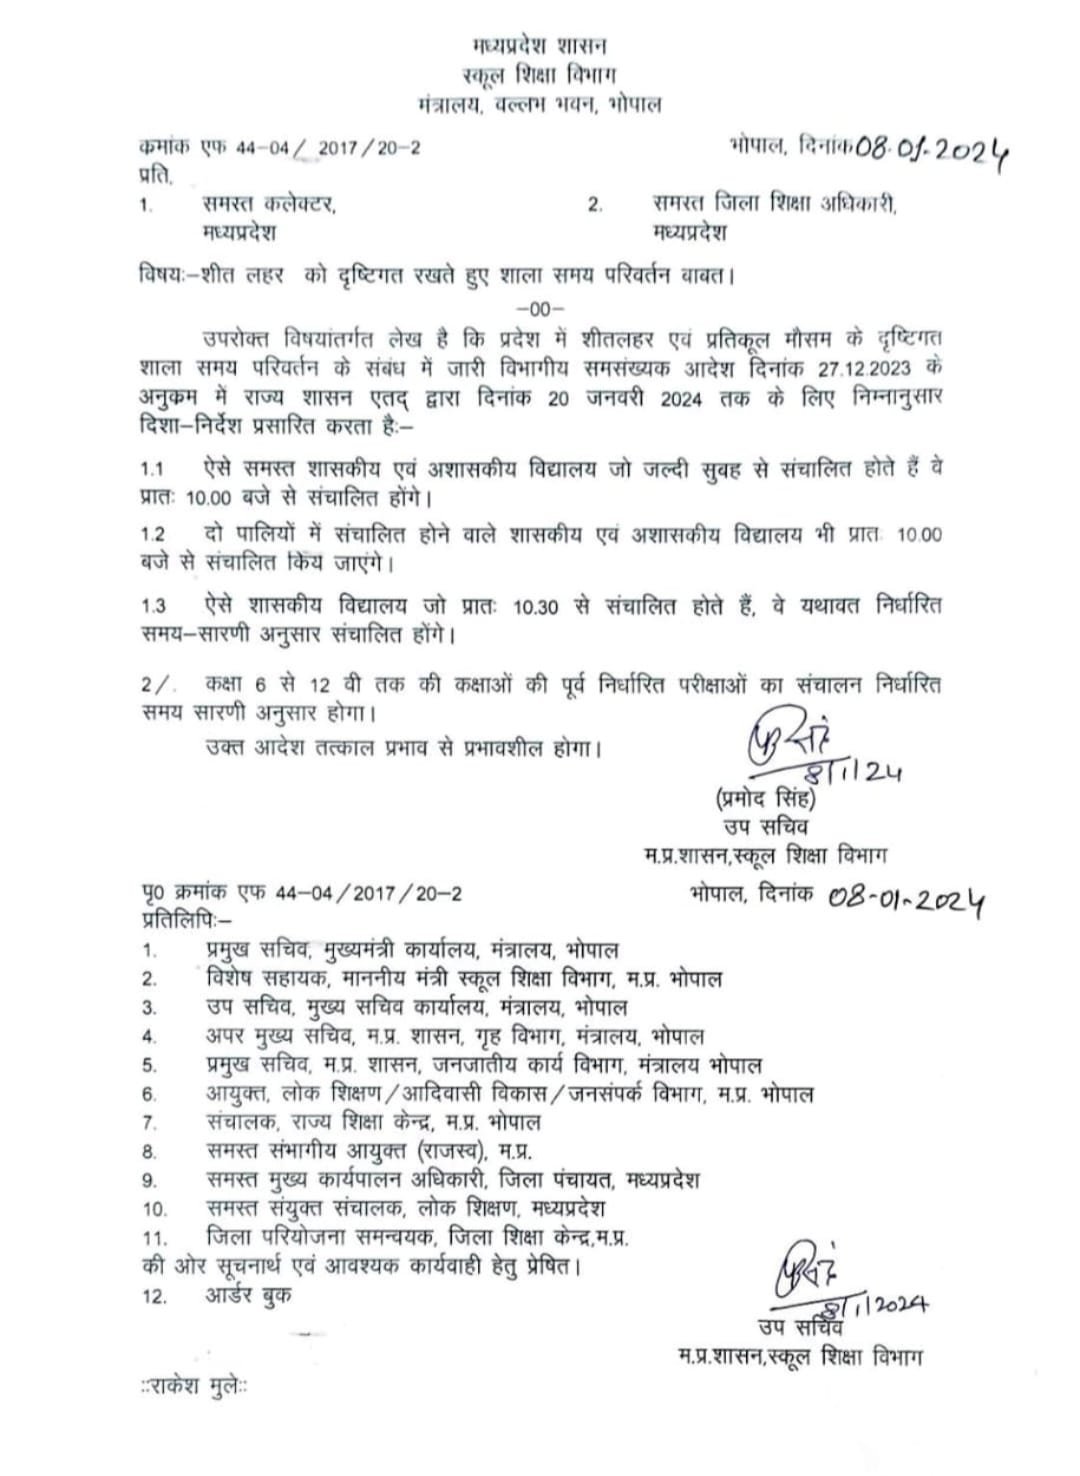 mp school time extended notification